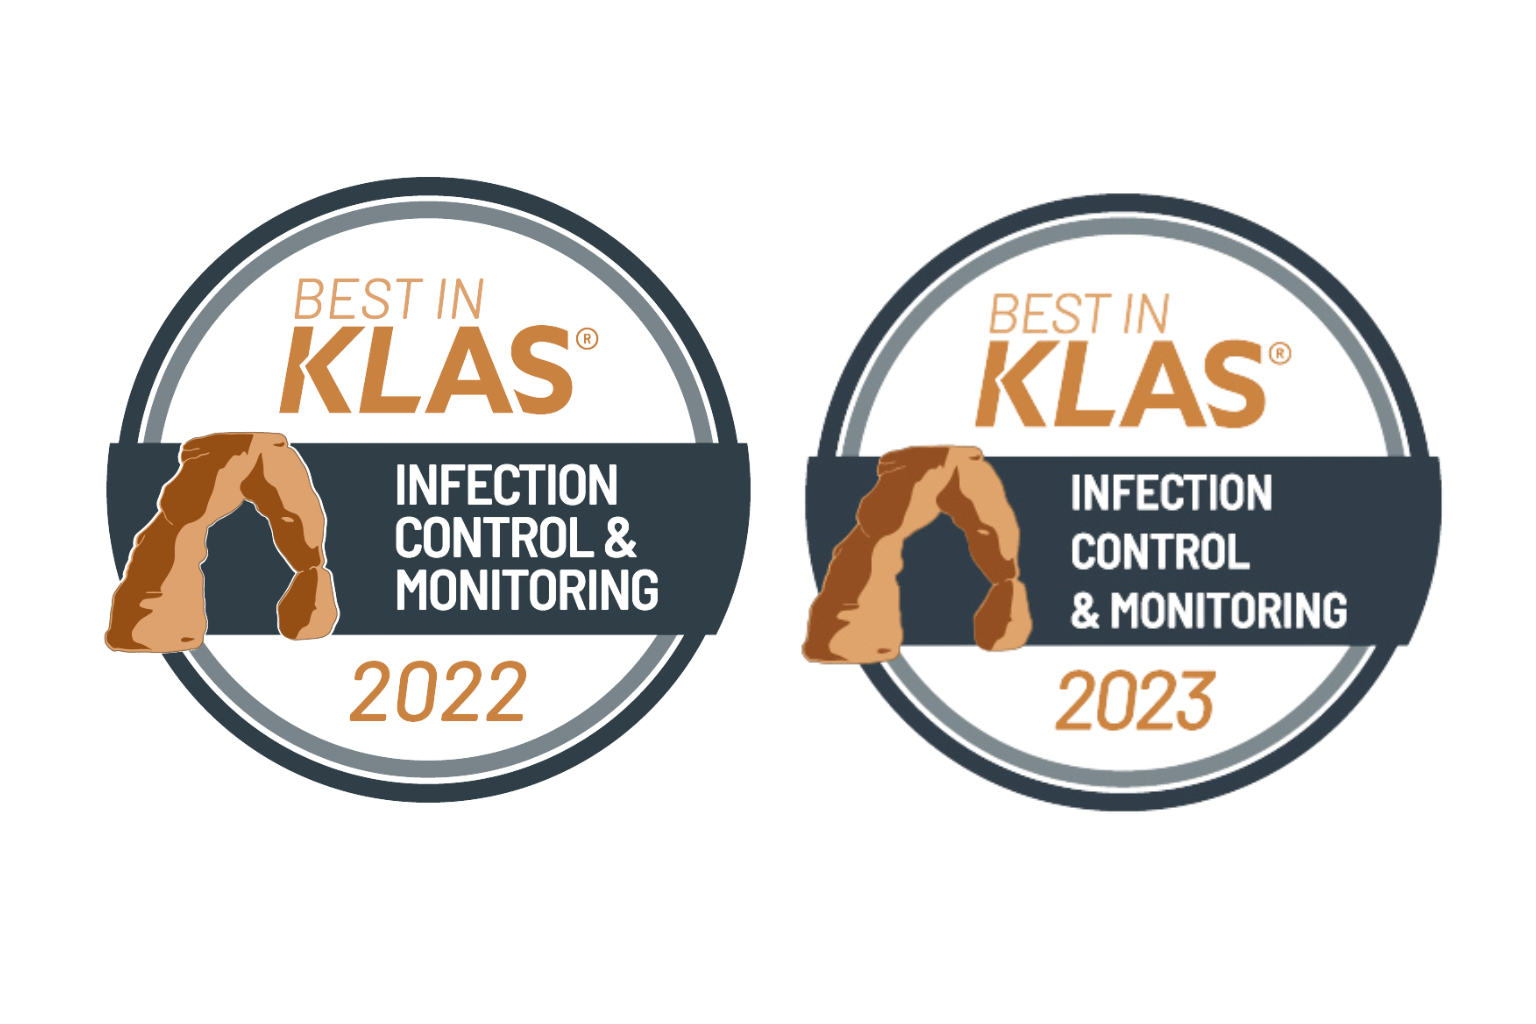 Best In Klas Infection Control and Monitoring